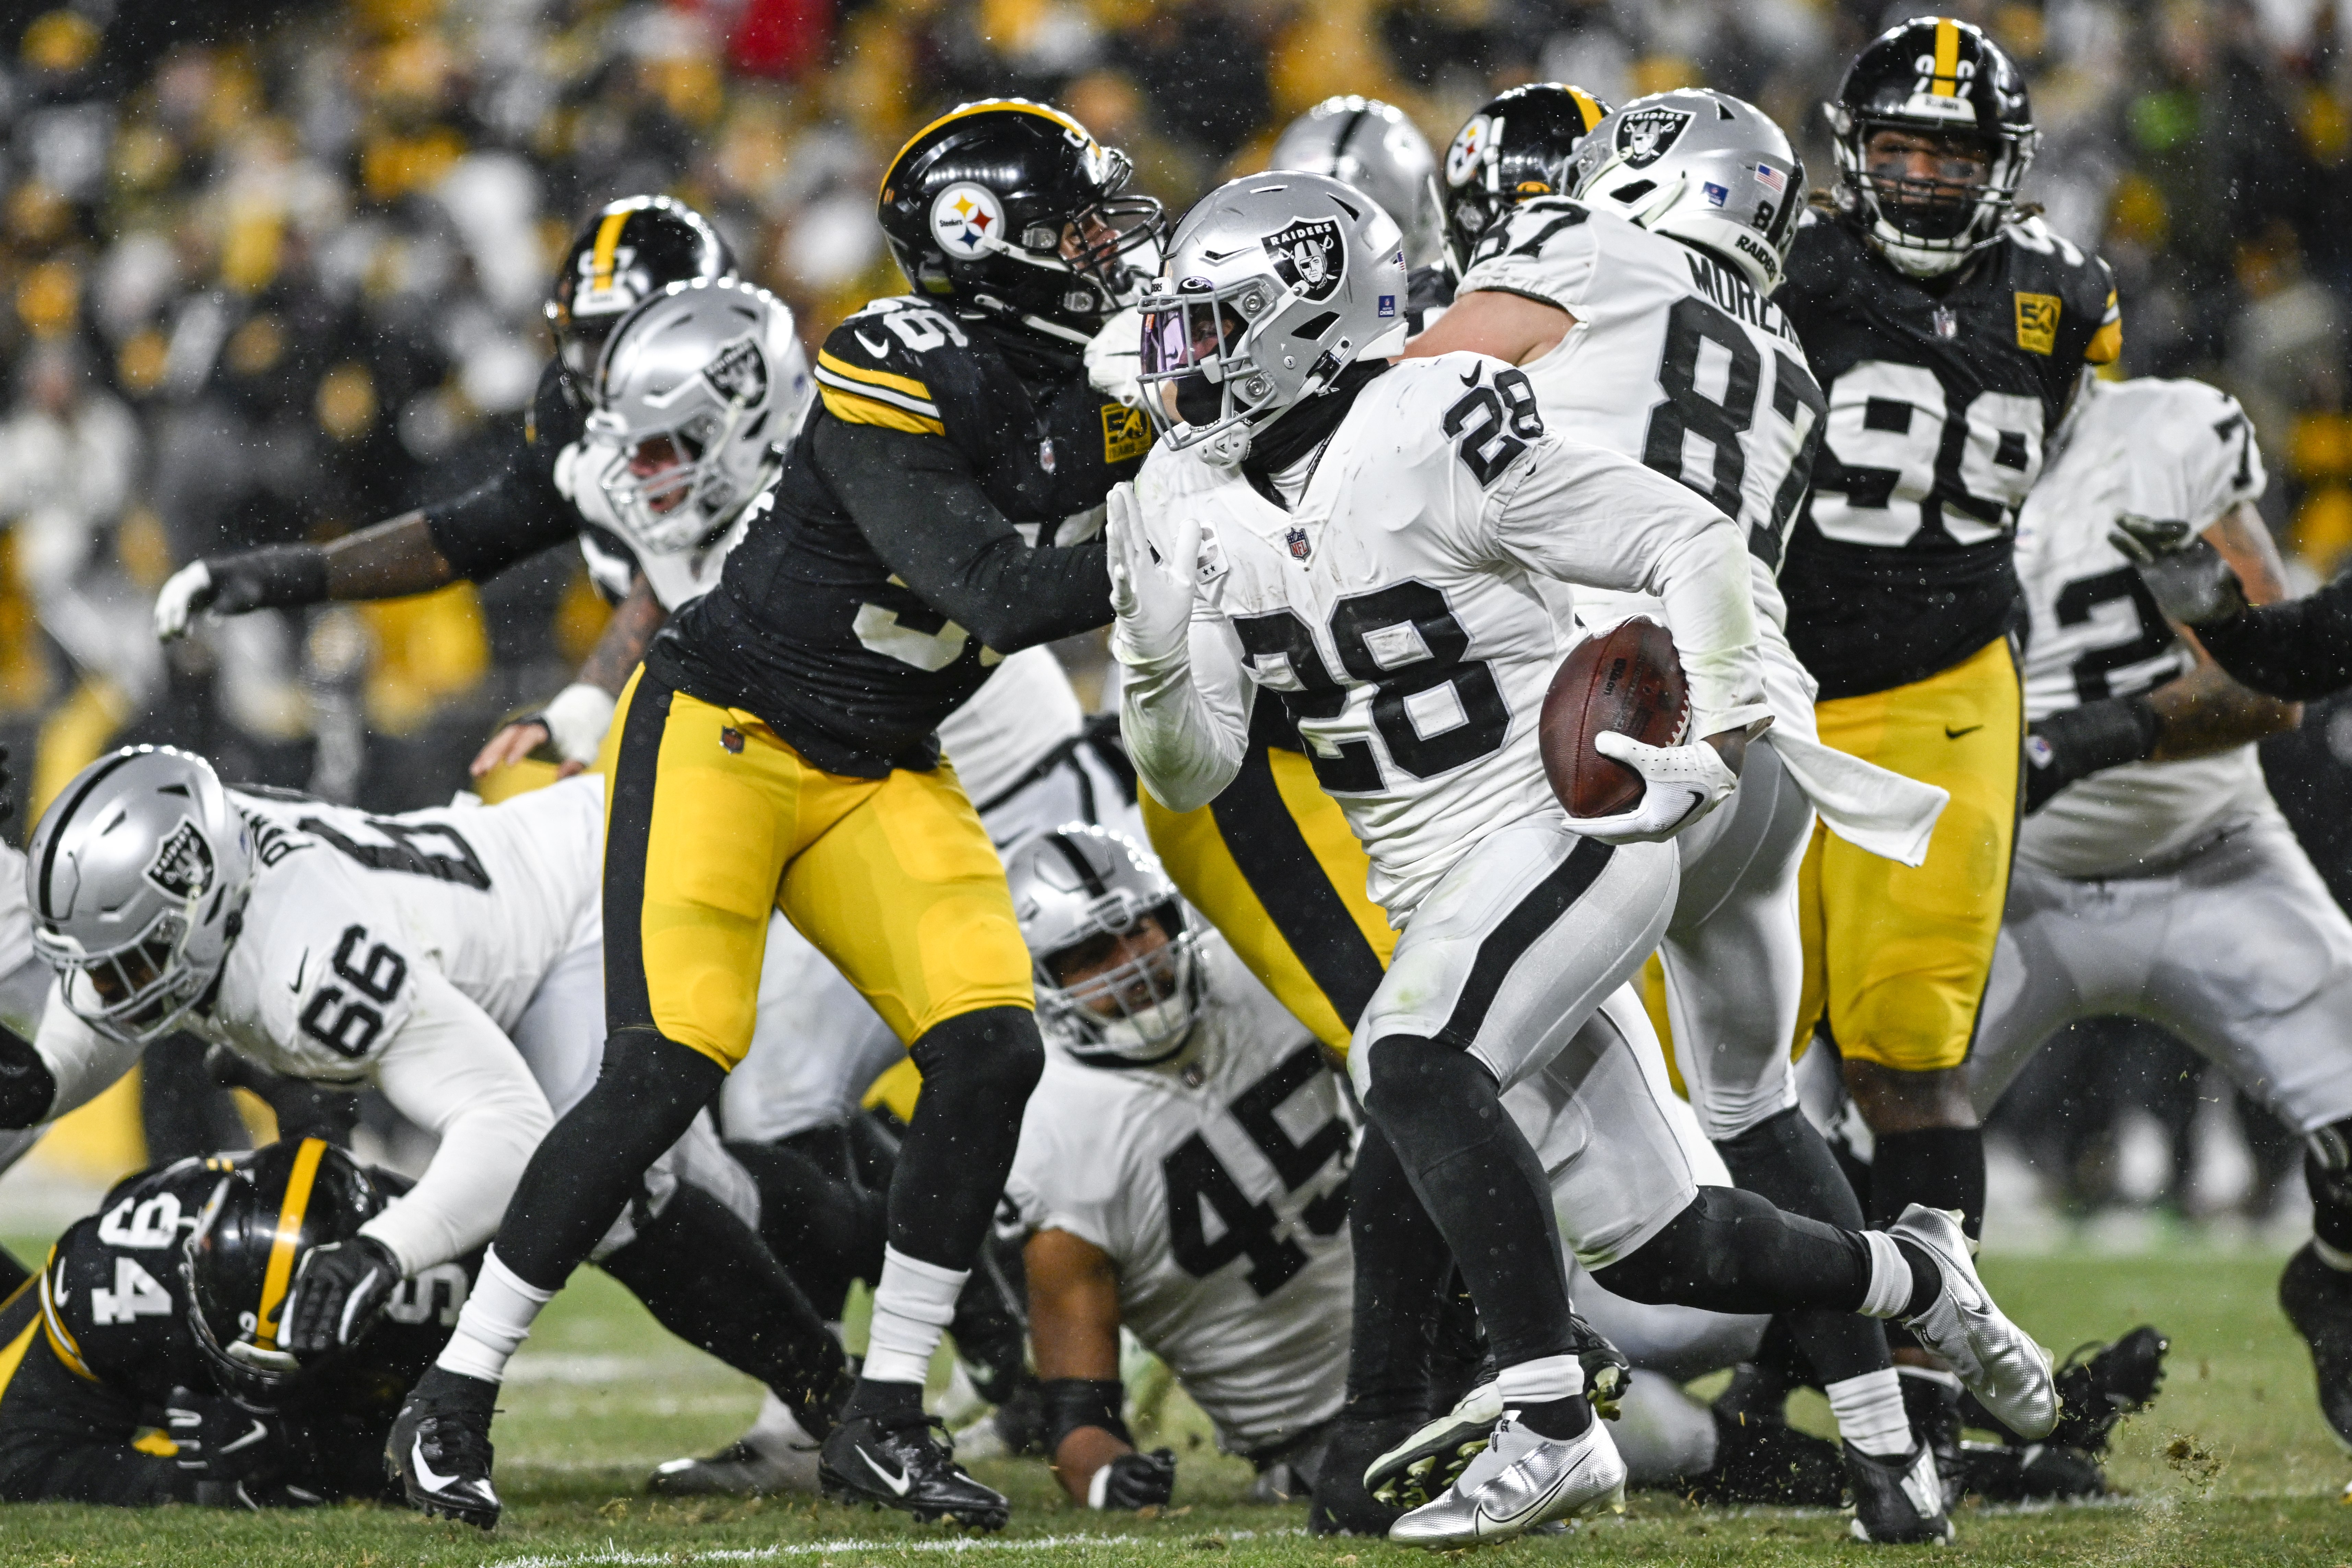 Josh Jacobs #28 of the Las Vegas Raiders runs the ball in the third quarter against the Pittsburgh Steelers at Acrisure Stadium on December 24, 2022 in Pittsburgh, Pennsylvania.